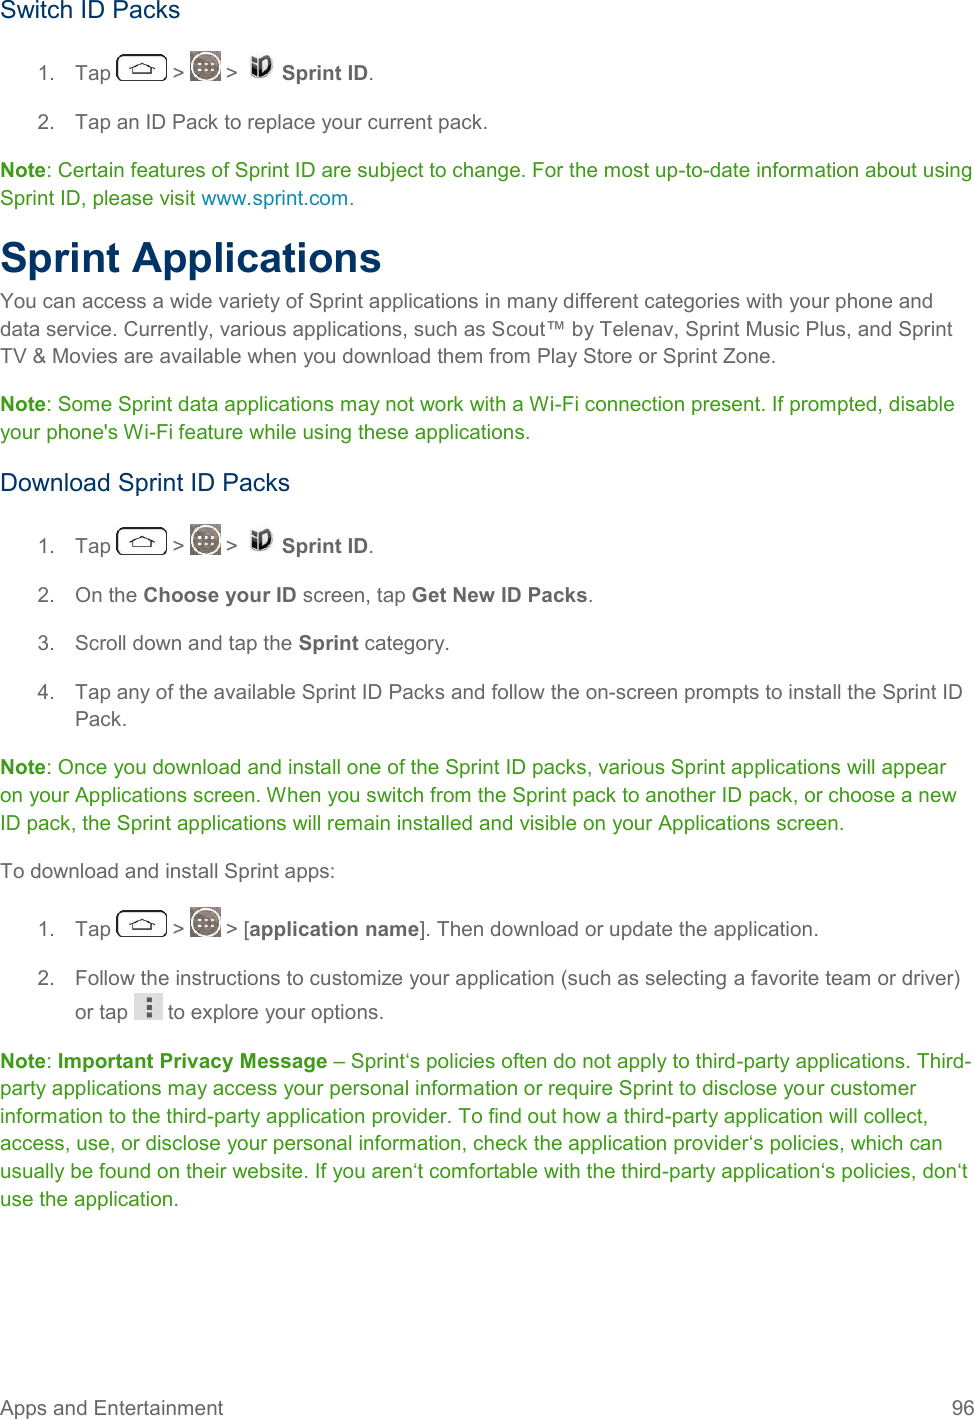 Apps and Entertainment  96   Switch ID Packs 1.  Tap   &gt;   &gt;   Sprint ID. 2.  Tap an ID Pack to replace your current pack. Note: Certain features of Sprint ID are subject to change. For the most up-to-date information about using Sprint ID, please visit www.sprint.com. Sprint Applications You can access a wide variety of Sprint applications in many different categories with your phone and data service. Currently, various applications, such as Scout™ by Telenav, Sprint Music Plus, and Sprint TV &amp; Movies are available when you download them from Play Store or Sprint Zone. Note: Some Sprint data applications may not work with a Wi-Fi connection present. If prompted, disable your phone&apos;s Wi-Fi feature while using these applications. Download Sprint ID Packs 1.  Tap   &gt;   &gt;   Sprint ID.  2.  On the Choose your ID screen, tap Get New ID Packs. 3.  Scroll down and tap the Sprint category. 4.  Tap any of the available Sprint ID Packs and follow the on-screen prompts to install the Sprint ID Pack. Note: Once you download and install one of the Sprint ID packs, various Sprint applications will appear on your Applications screen. When you switch from the Sprint pack to another ID pack, or choose a new ID pack, the Sprint applications will remain installed and visible on your Applications screen. To download and install Sprint apps: 1.  Tap   &gt;   &gt; [application name]. Then download or update the application. 2.  Follow the instructions to customize your application (such as selecting a favorite team or driver) or tap   to explore your options. Note: Important Privacy Message – Sprint‘s policies often do not apply to third-party applications. Third-party applications may access your personal information or require Sprint to disclose your customer information to the third-party application provider. To find out how a third-party application will collect, access, use, or disclose your personal information, check the application provider‘s policies, which can usually be found on their website. If you aren‘t comfortable with the third-party application‘s policies, don‘t use the application. 